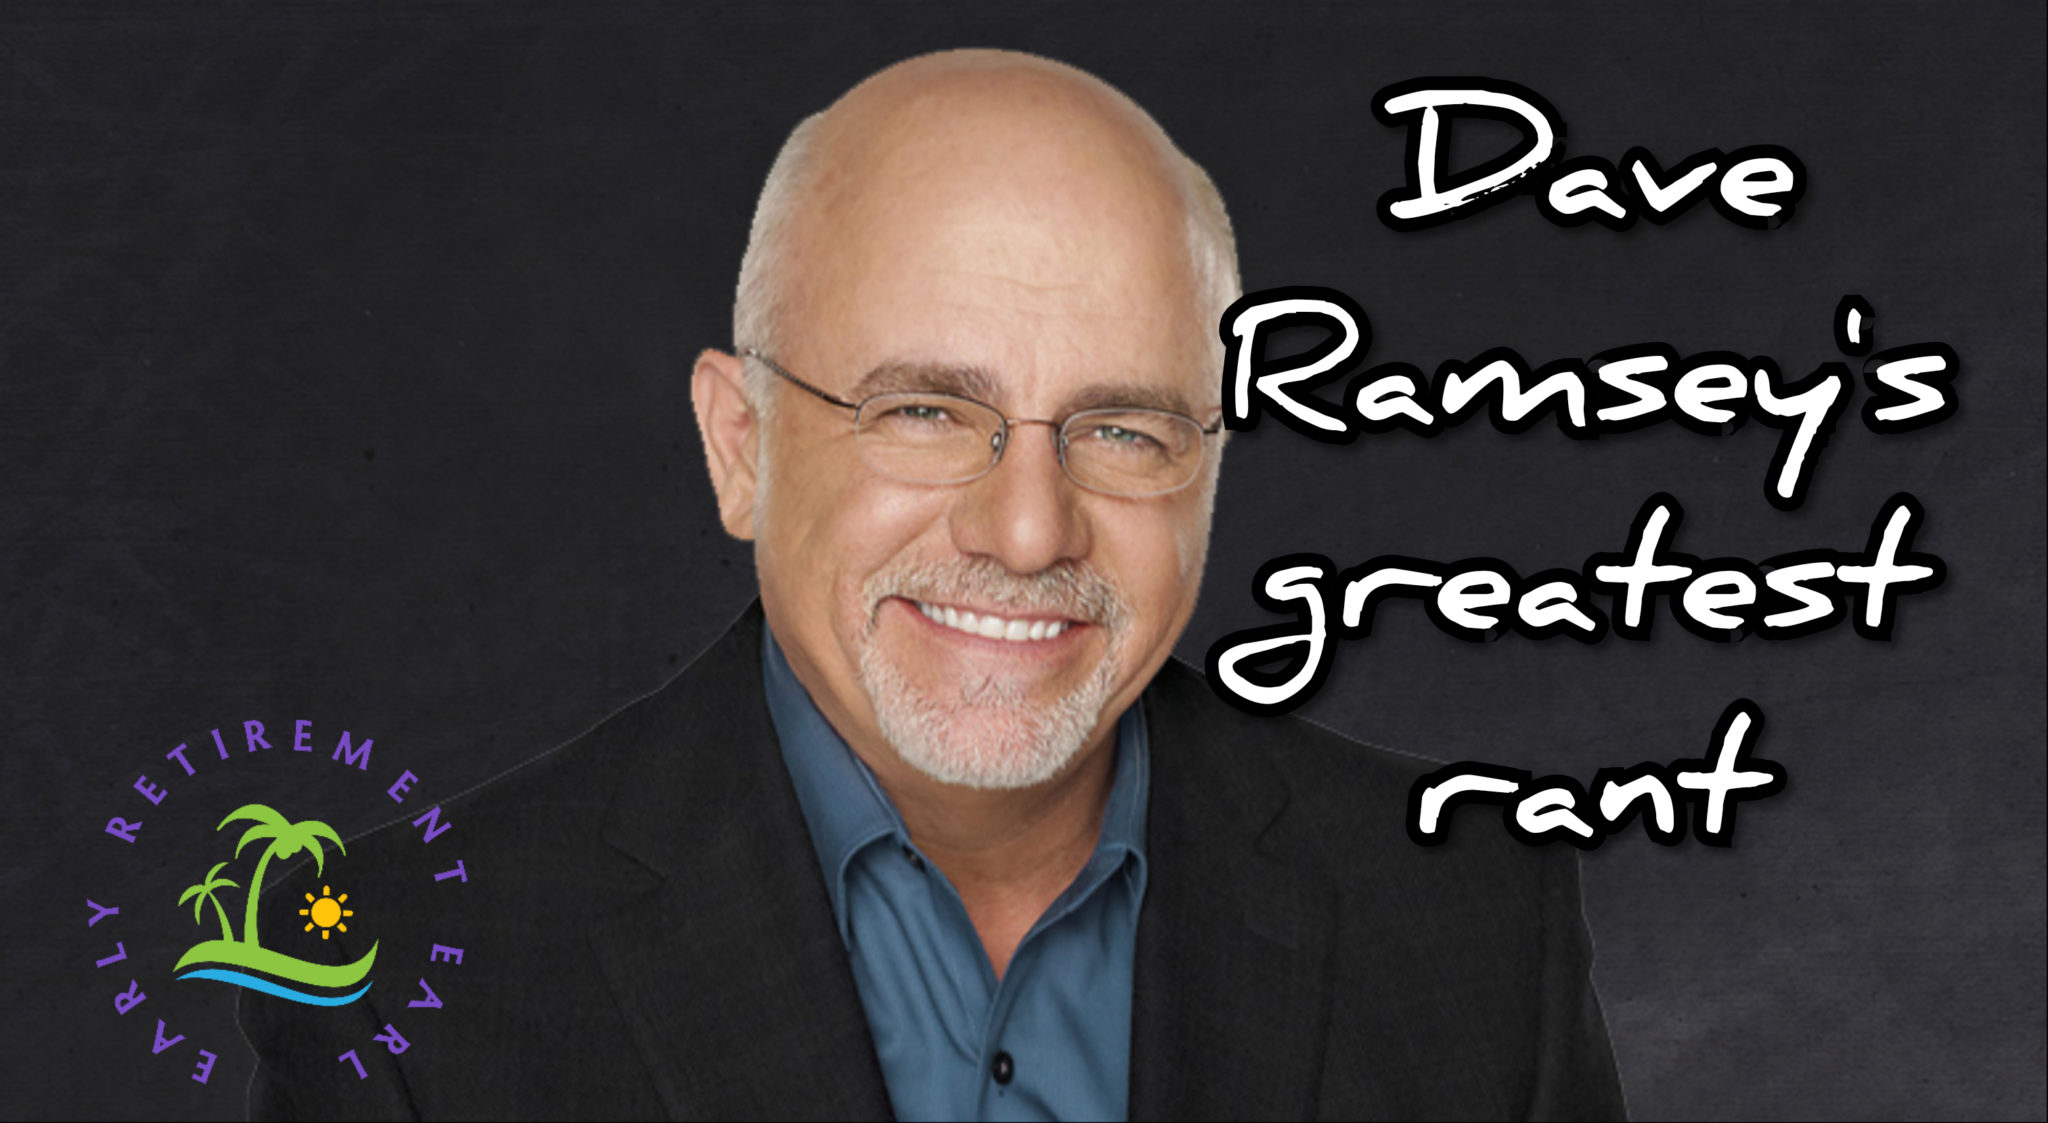 “Stop giving away your money” Dave Ramsey’s greatest rant